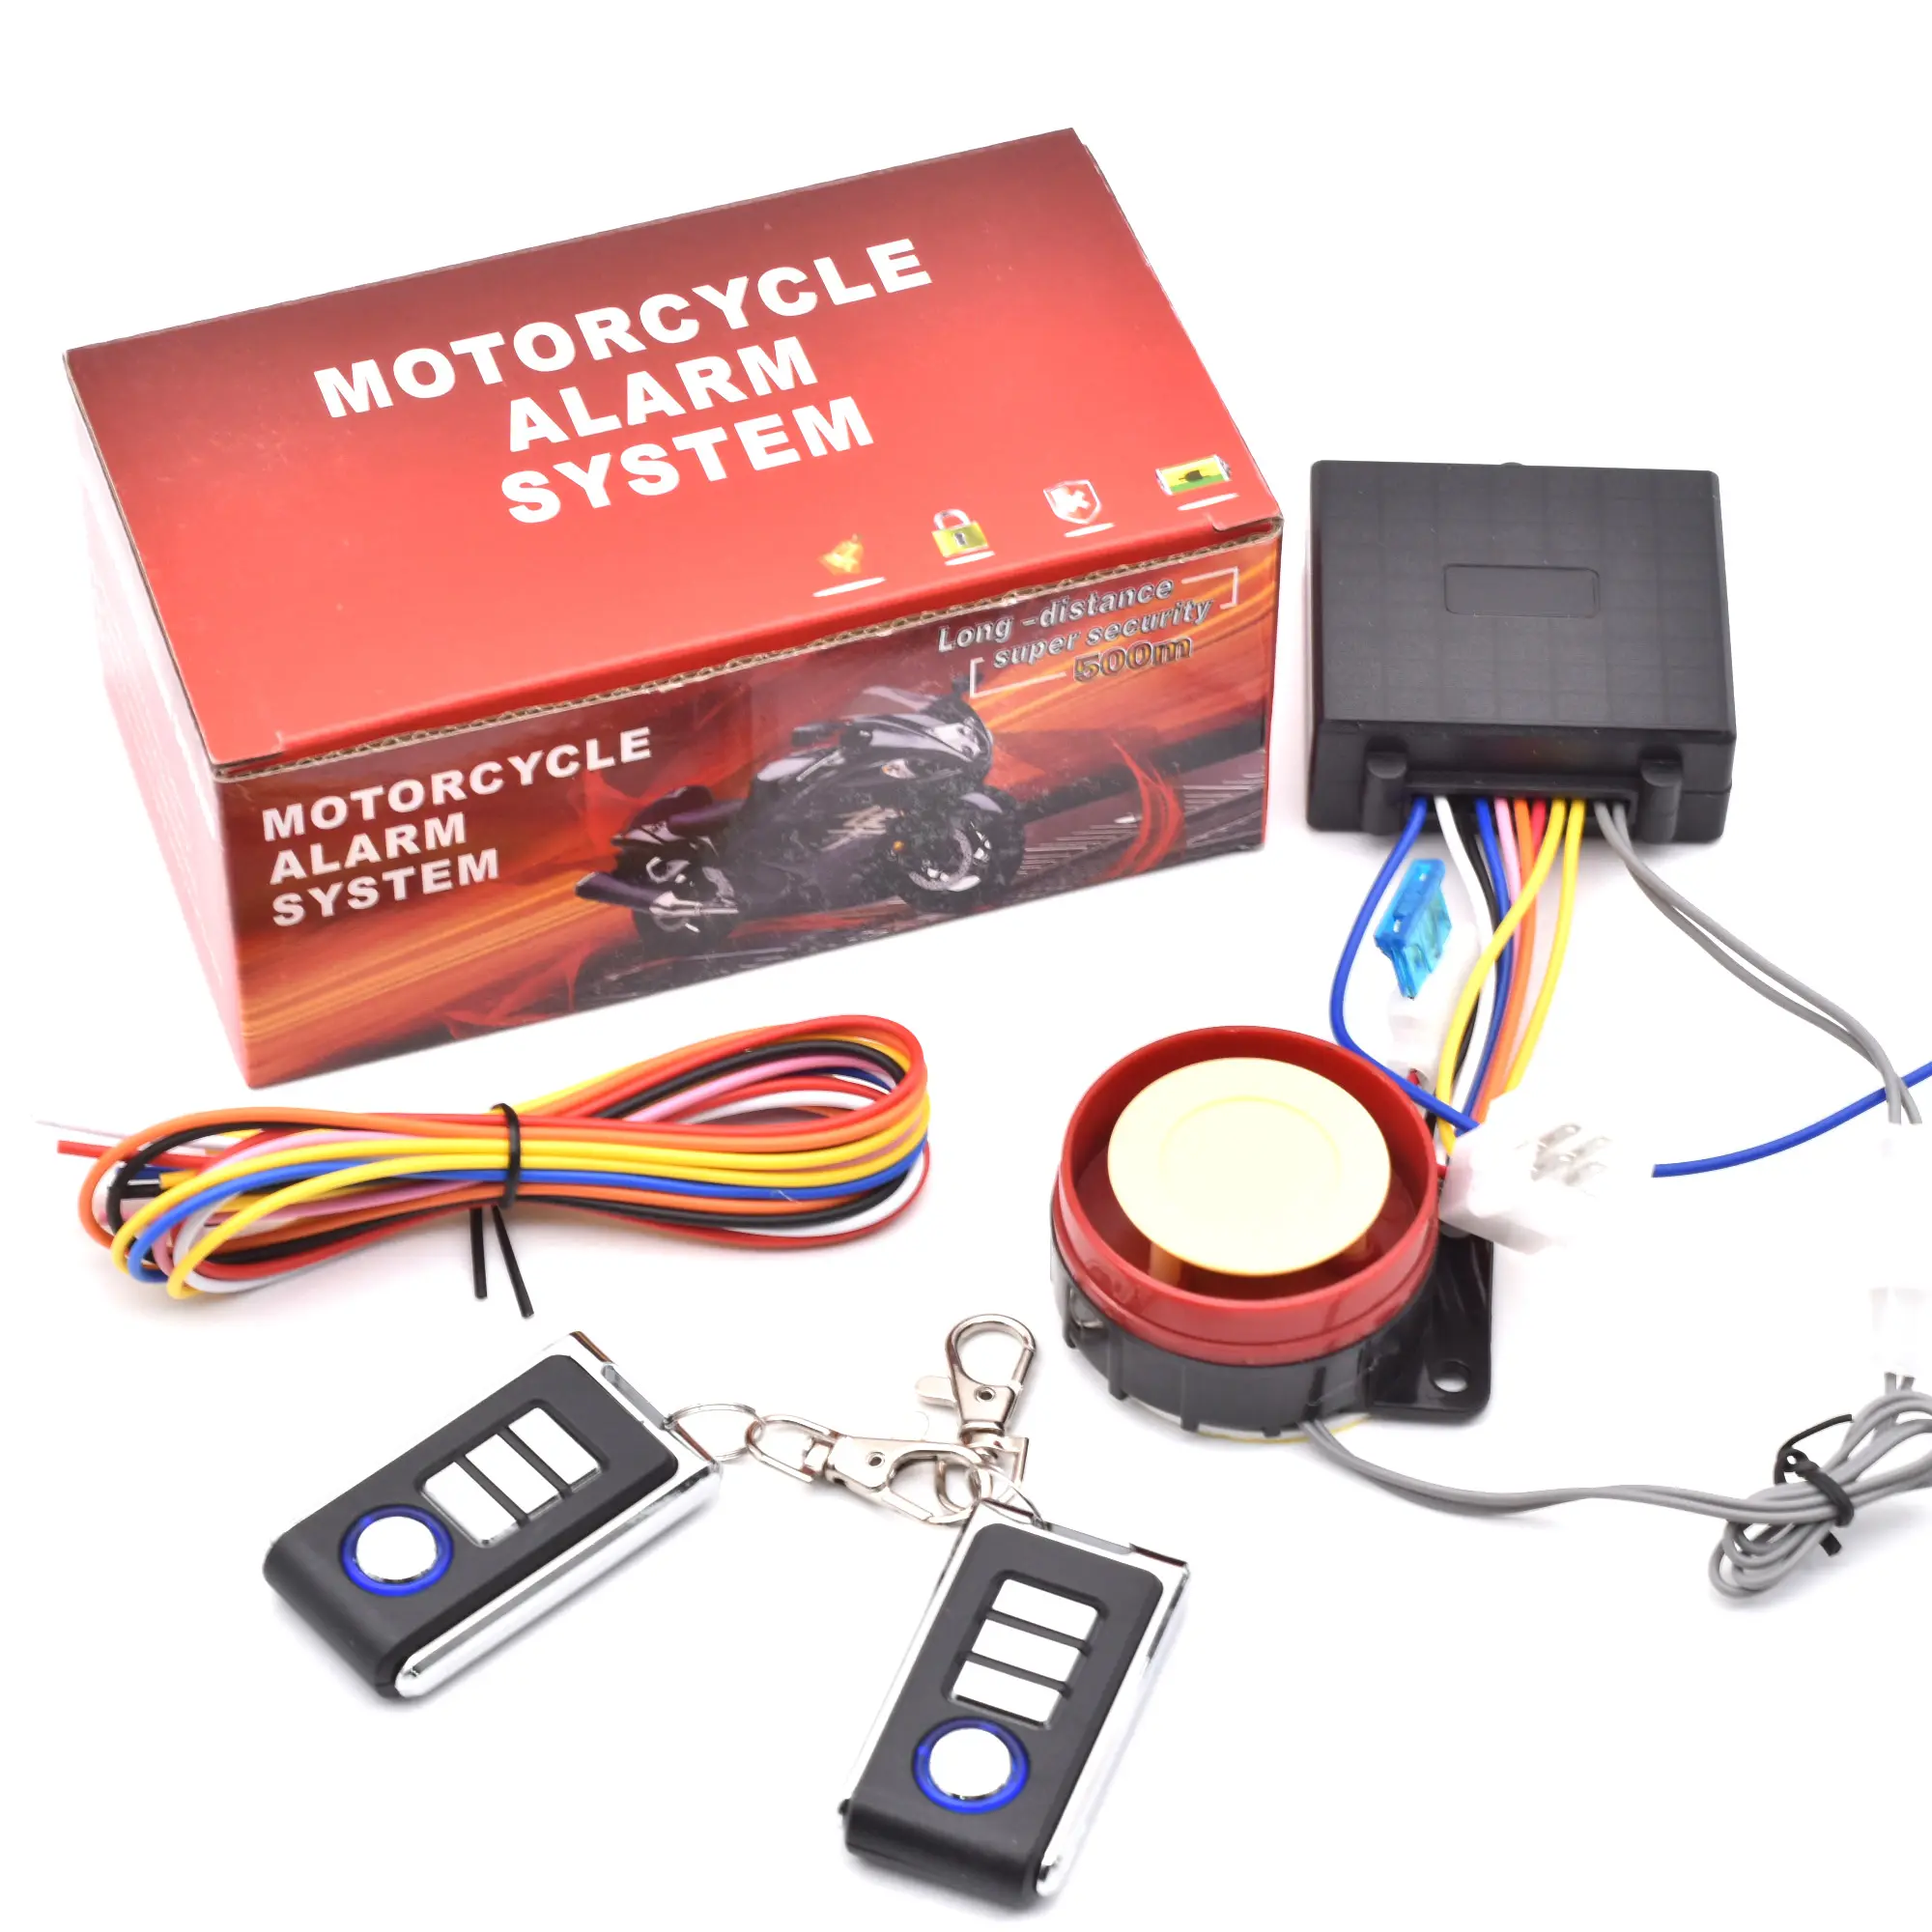 DC 12V High Security Alarm for Motorcycle with Remote Engine Start